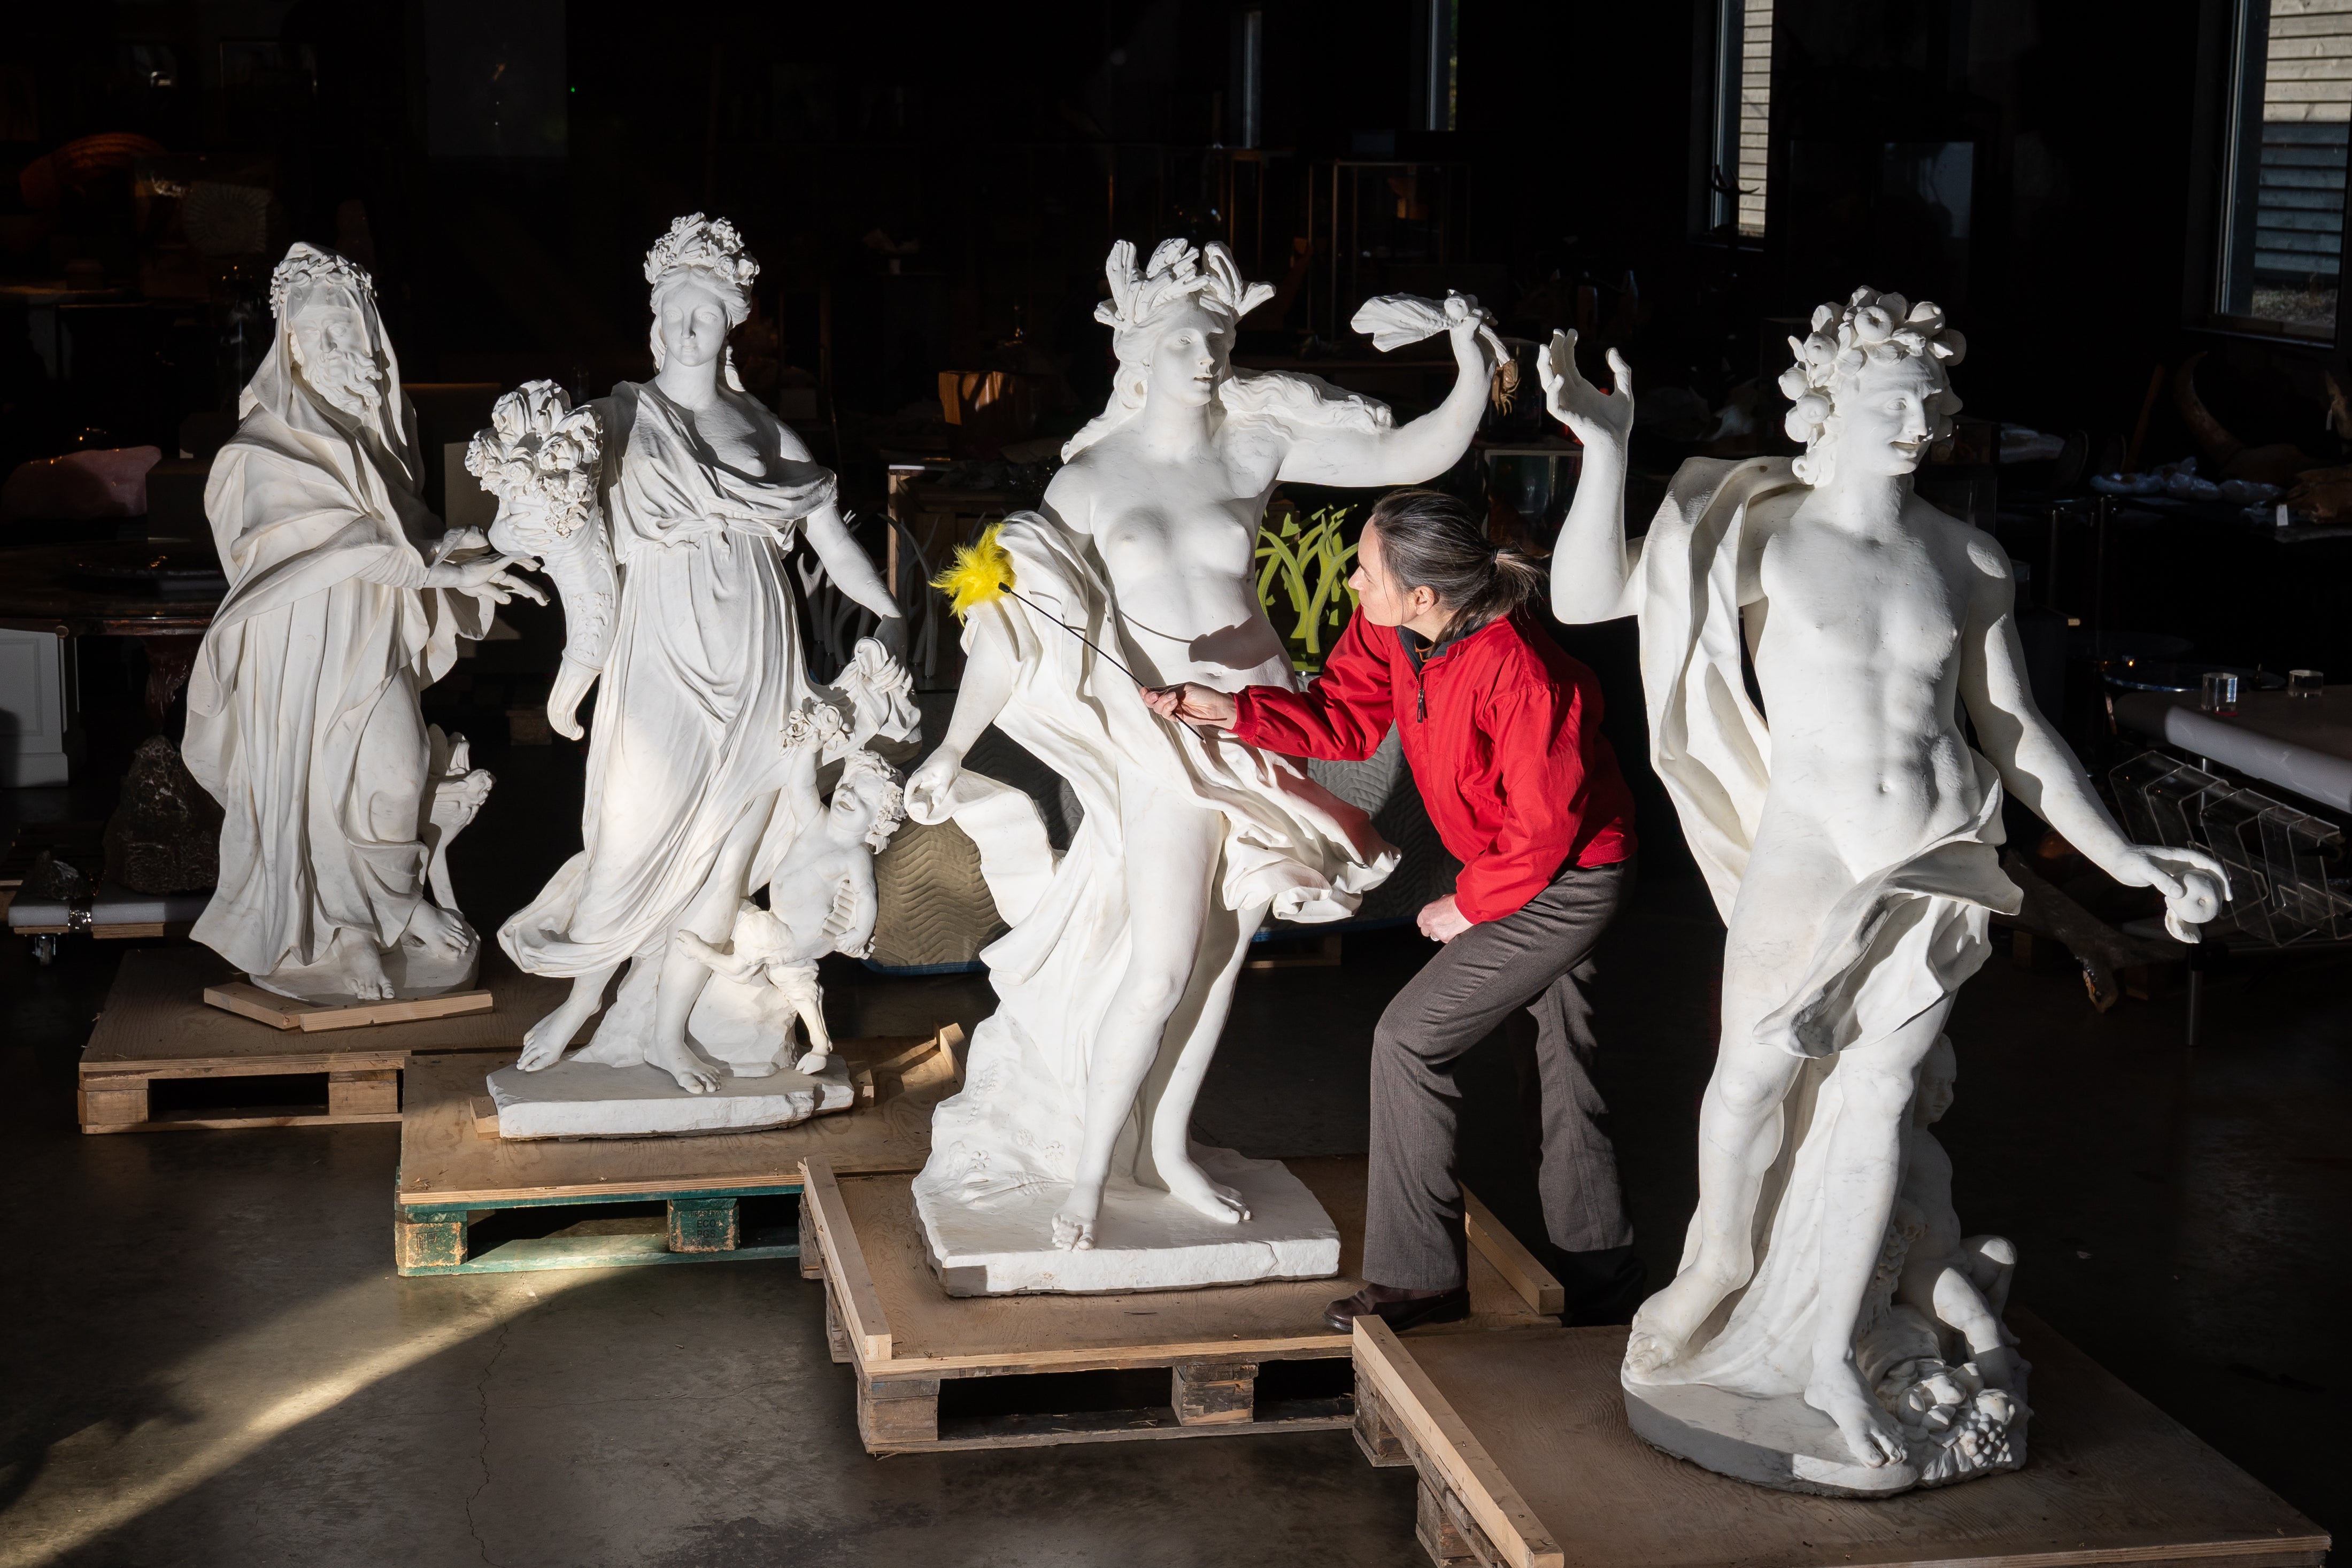 The rare marble figures are dusted ahead of the sale (Aaron Chown/PA)